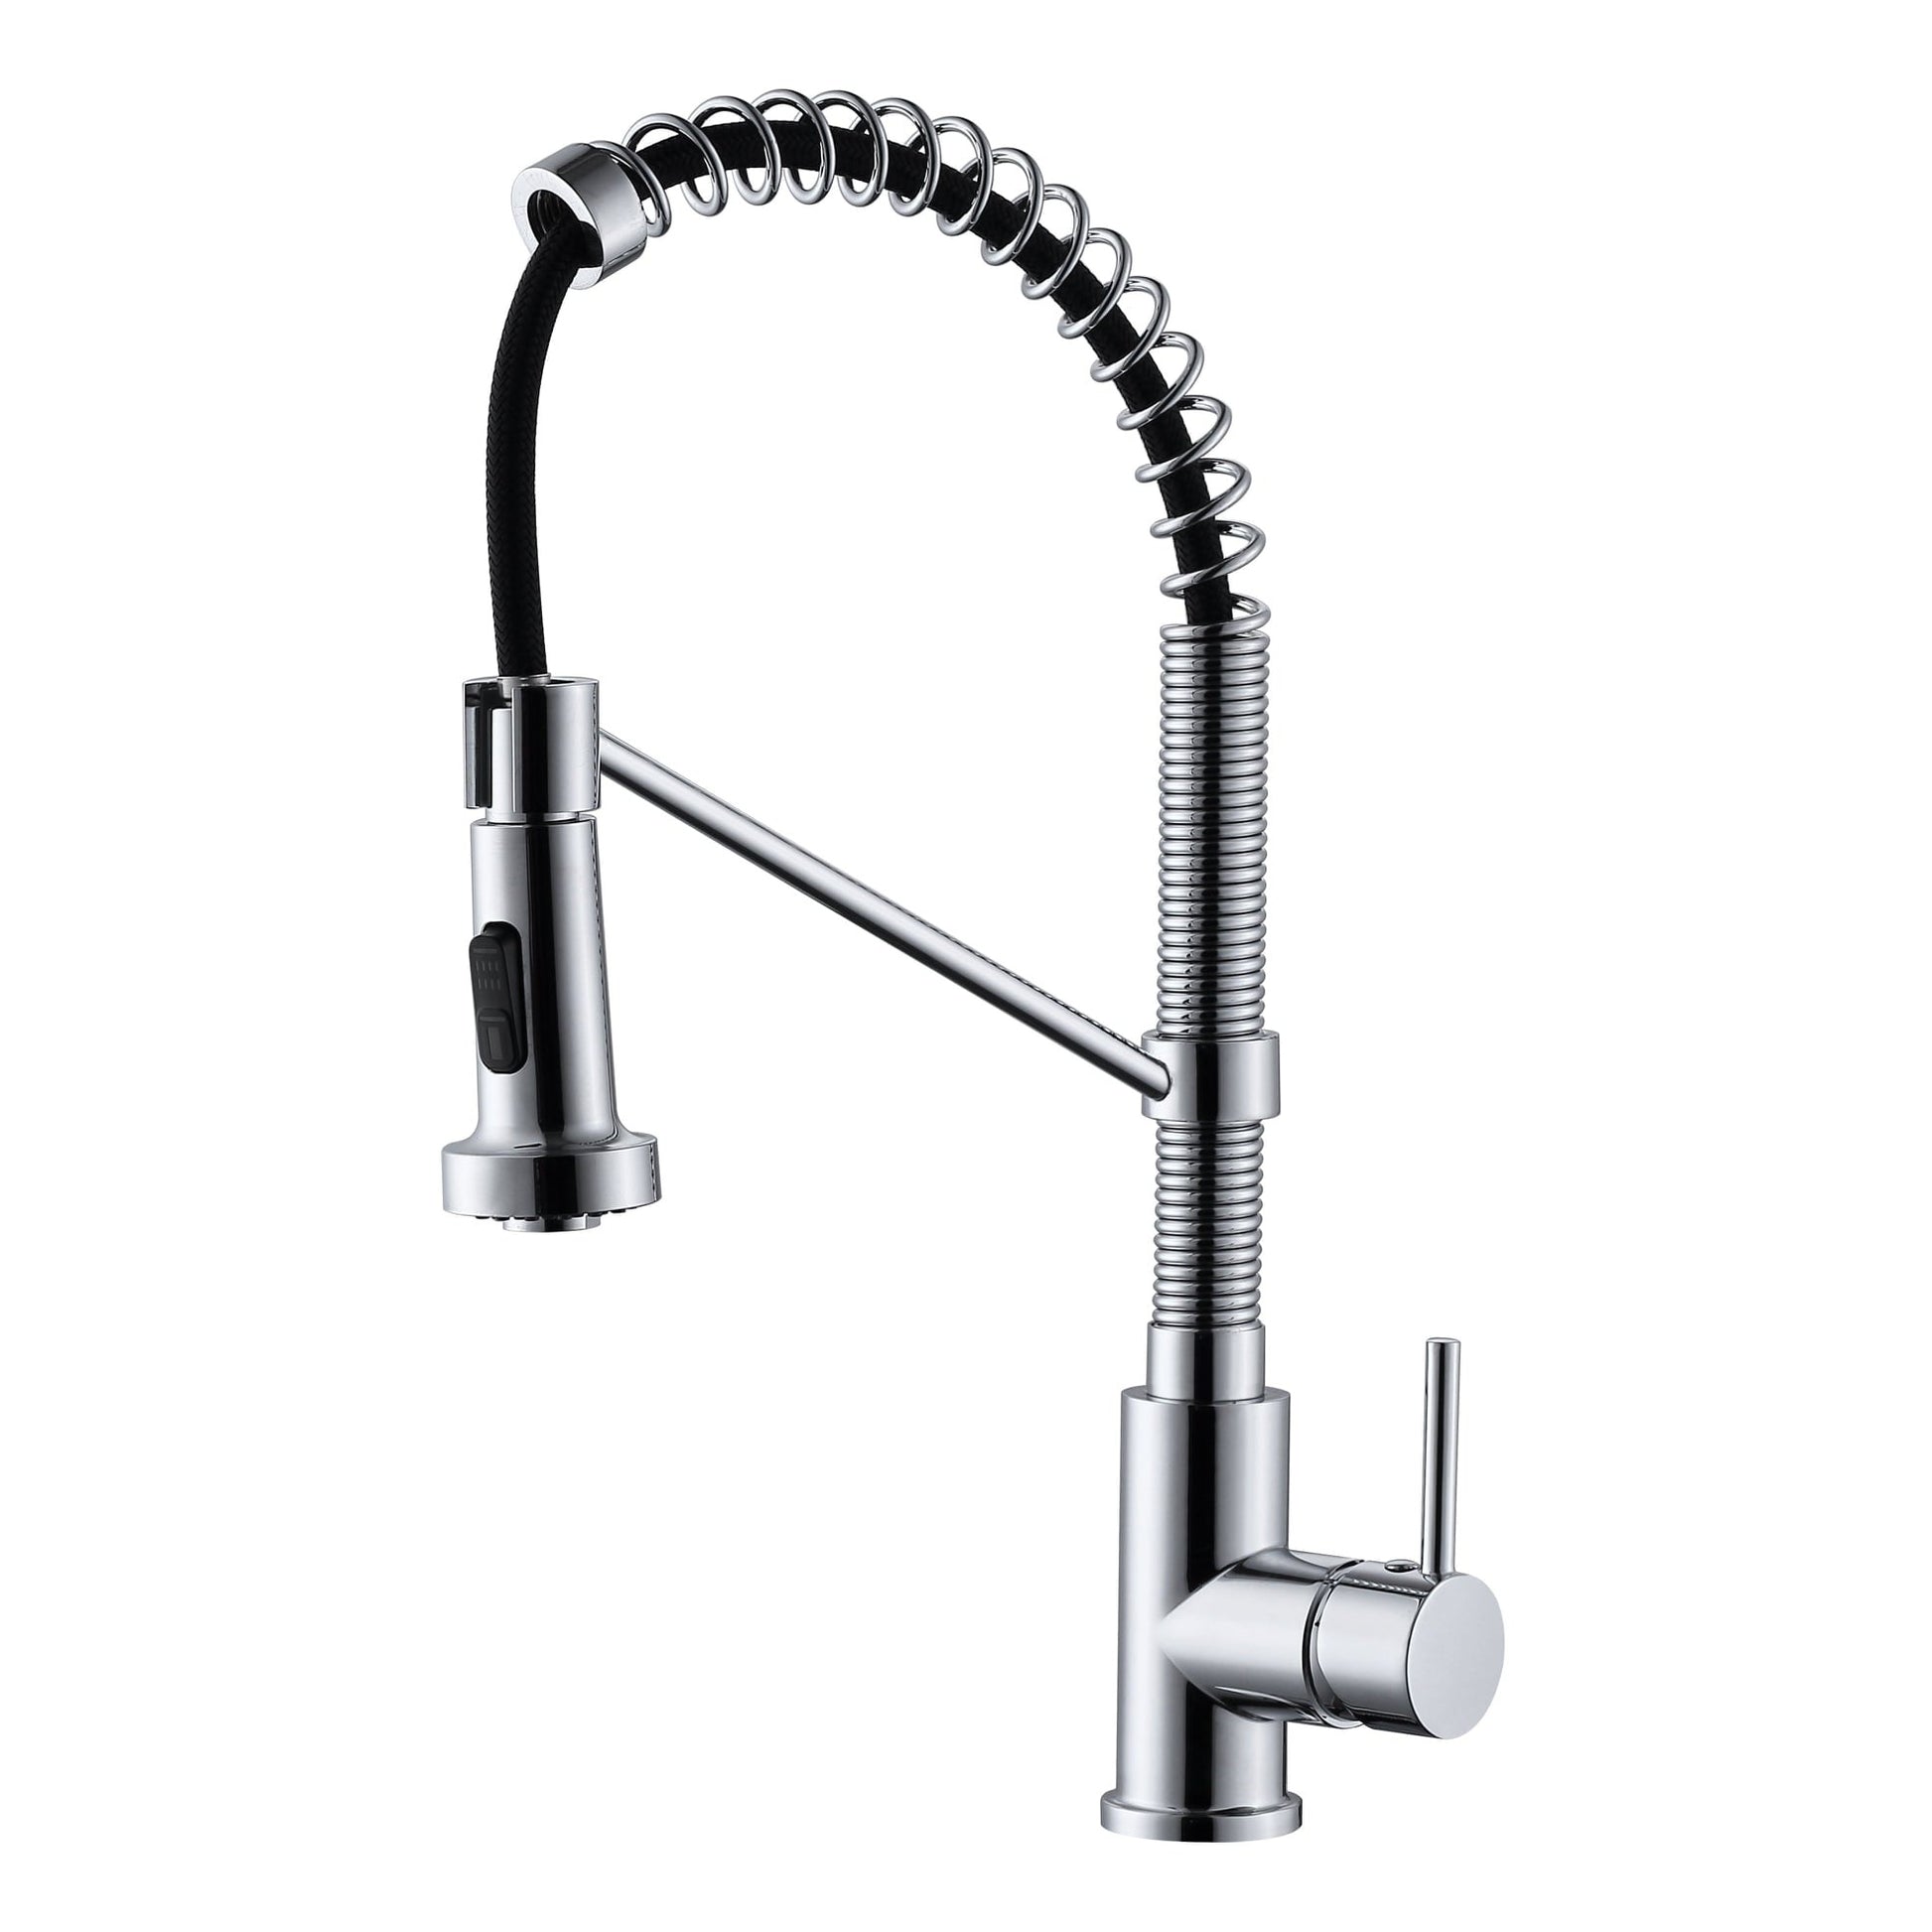 Duko FC373002-BN Stainless Steel Kitchen Single Handle Faucet in Brushed Nickel Finish